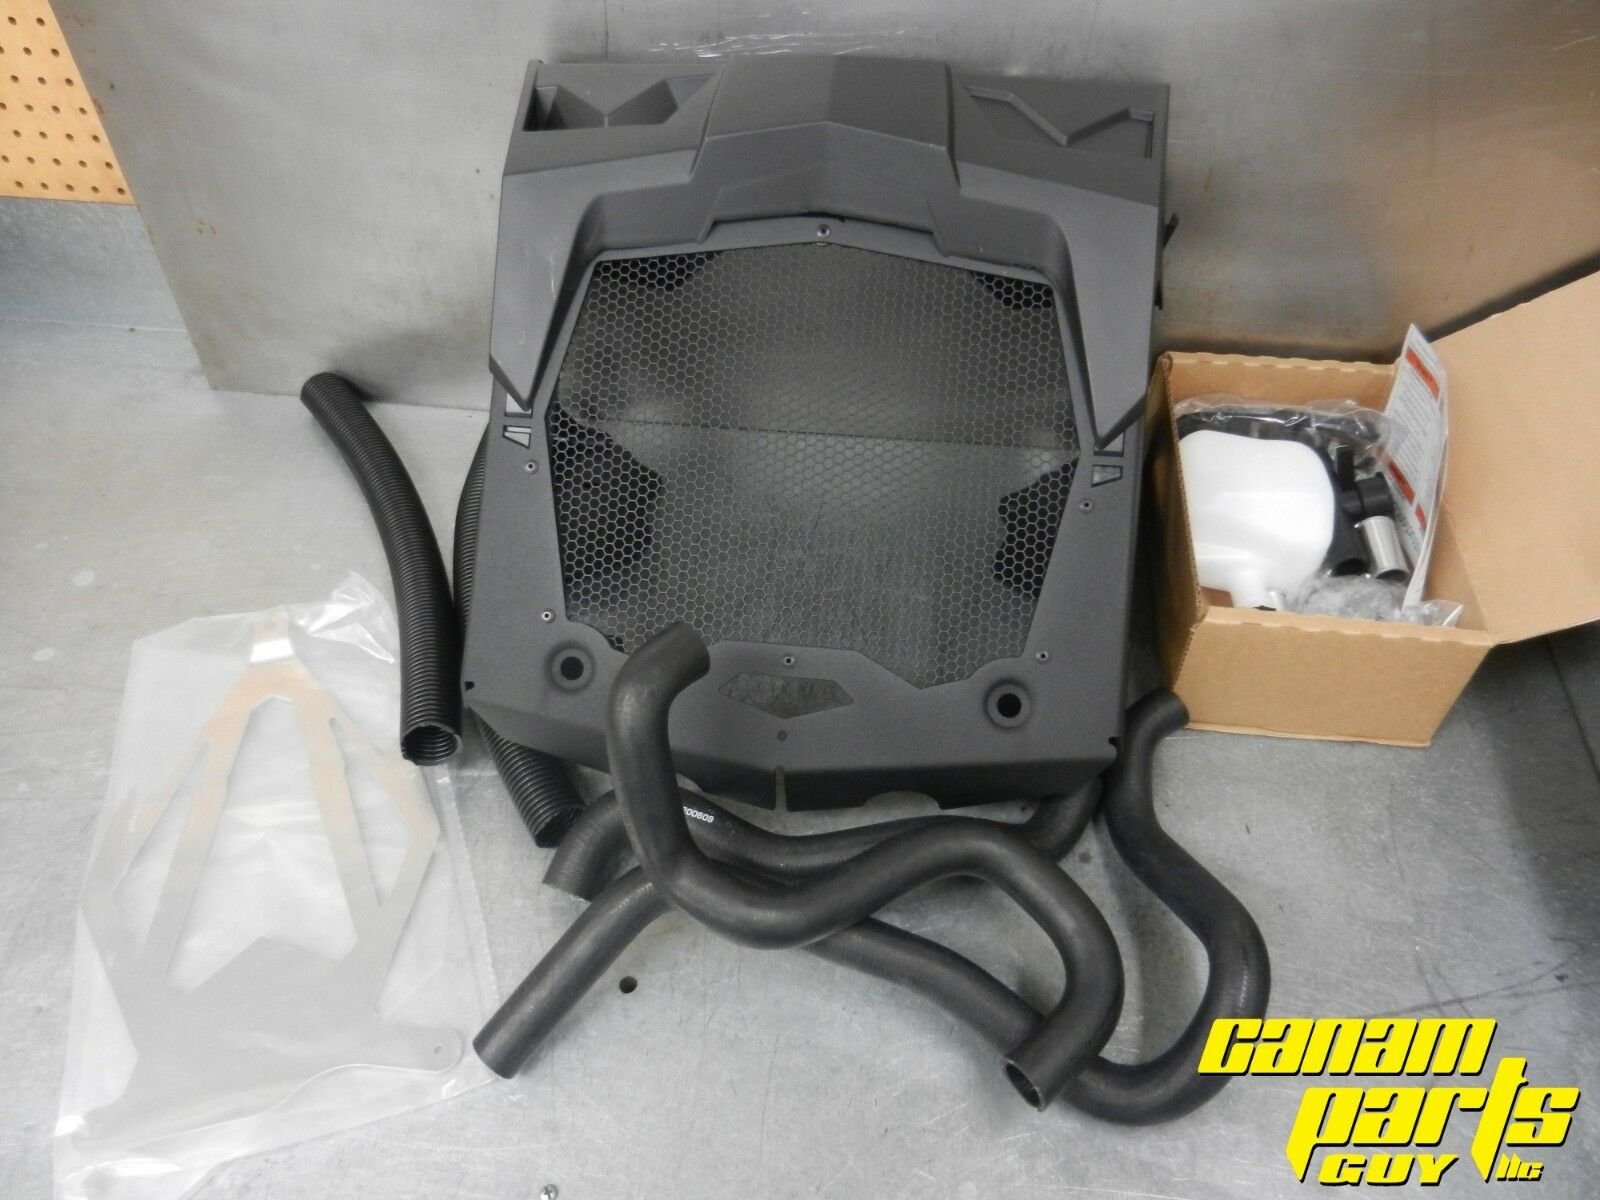 Oem Radiator Relocate Kit G2 Renegade Can Am Parts Guy